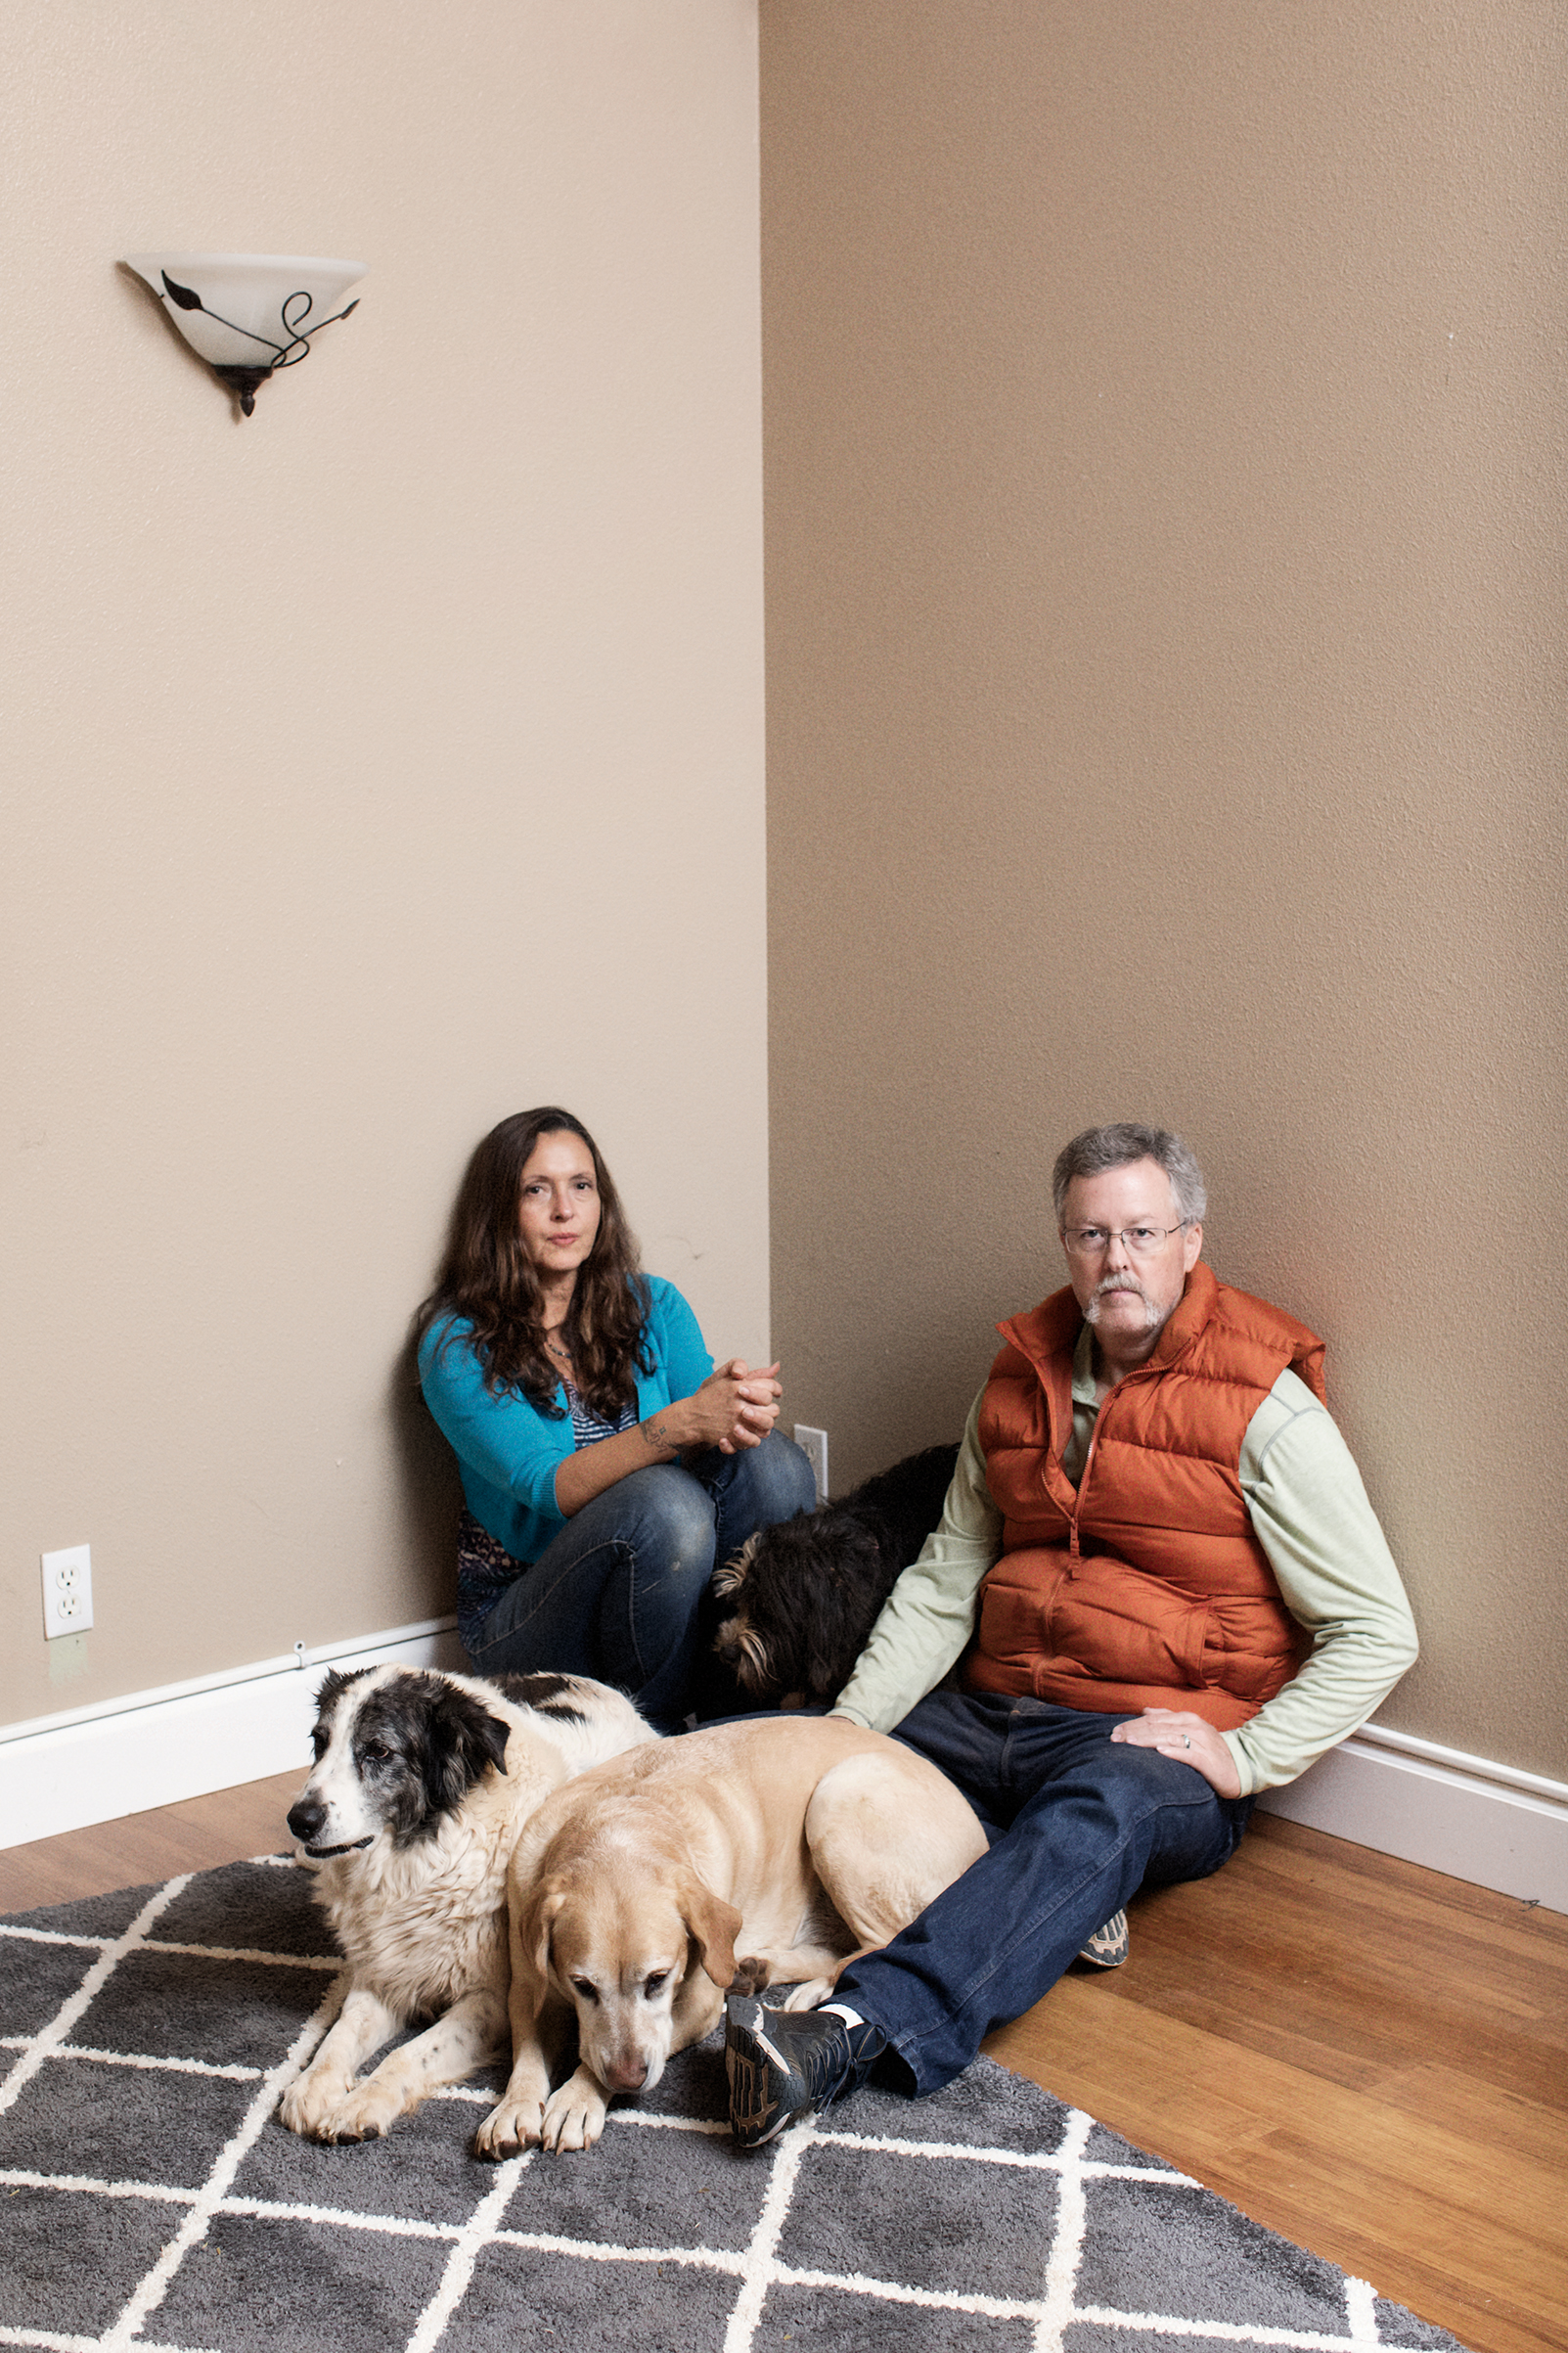 Kirk Trostle and Patty Garrison in a rental in Happy Valley, Calif., on Nov. 28, 2018. (Philip Montgomery for TIME)